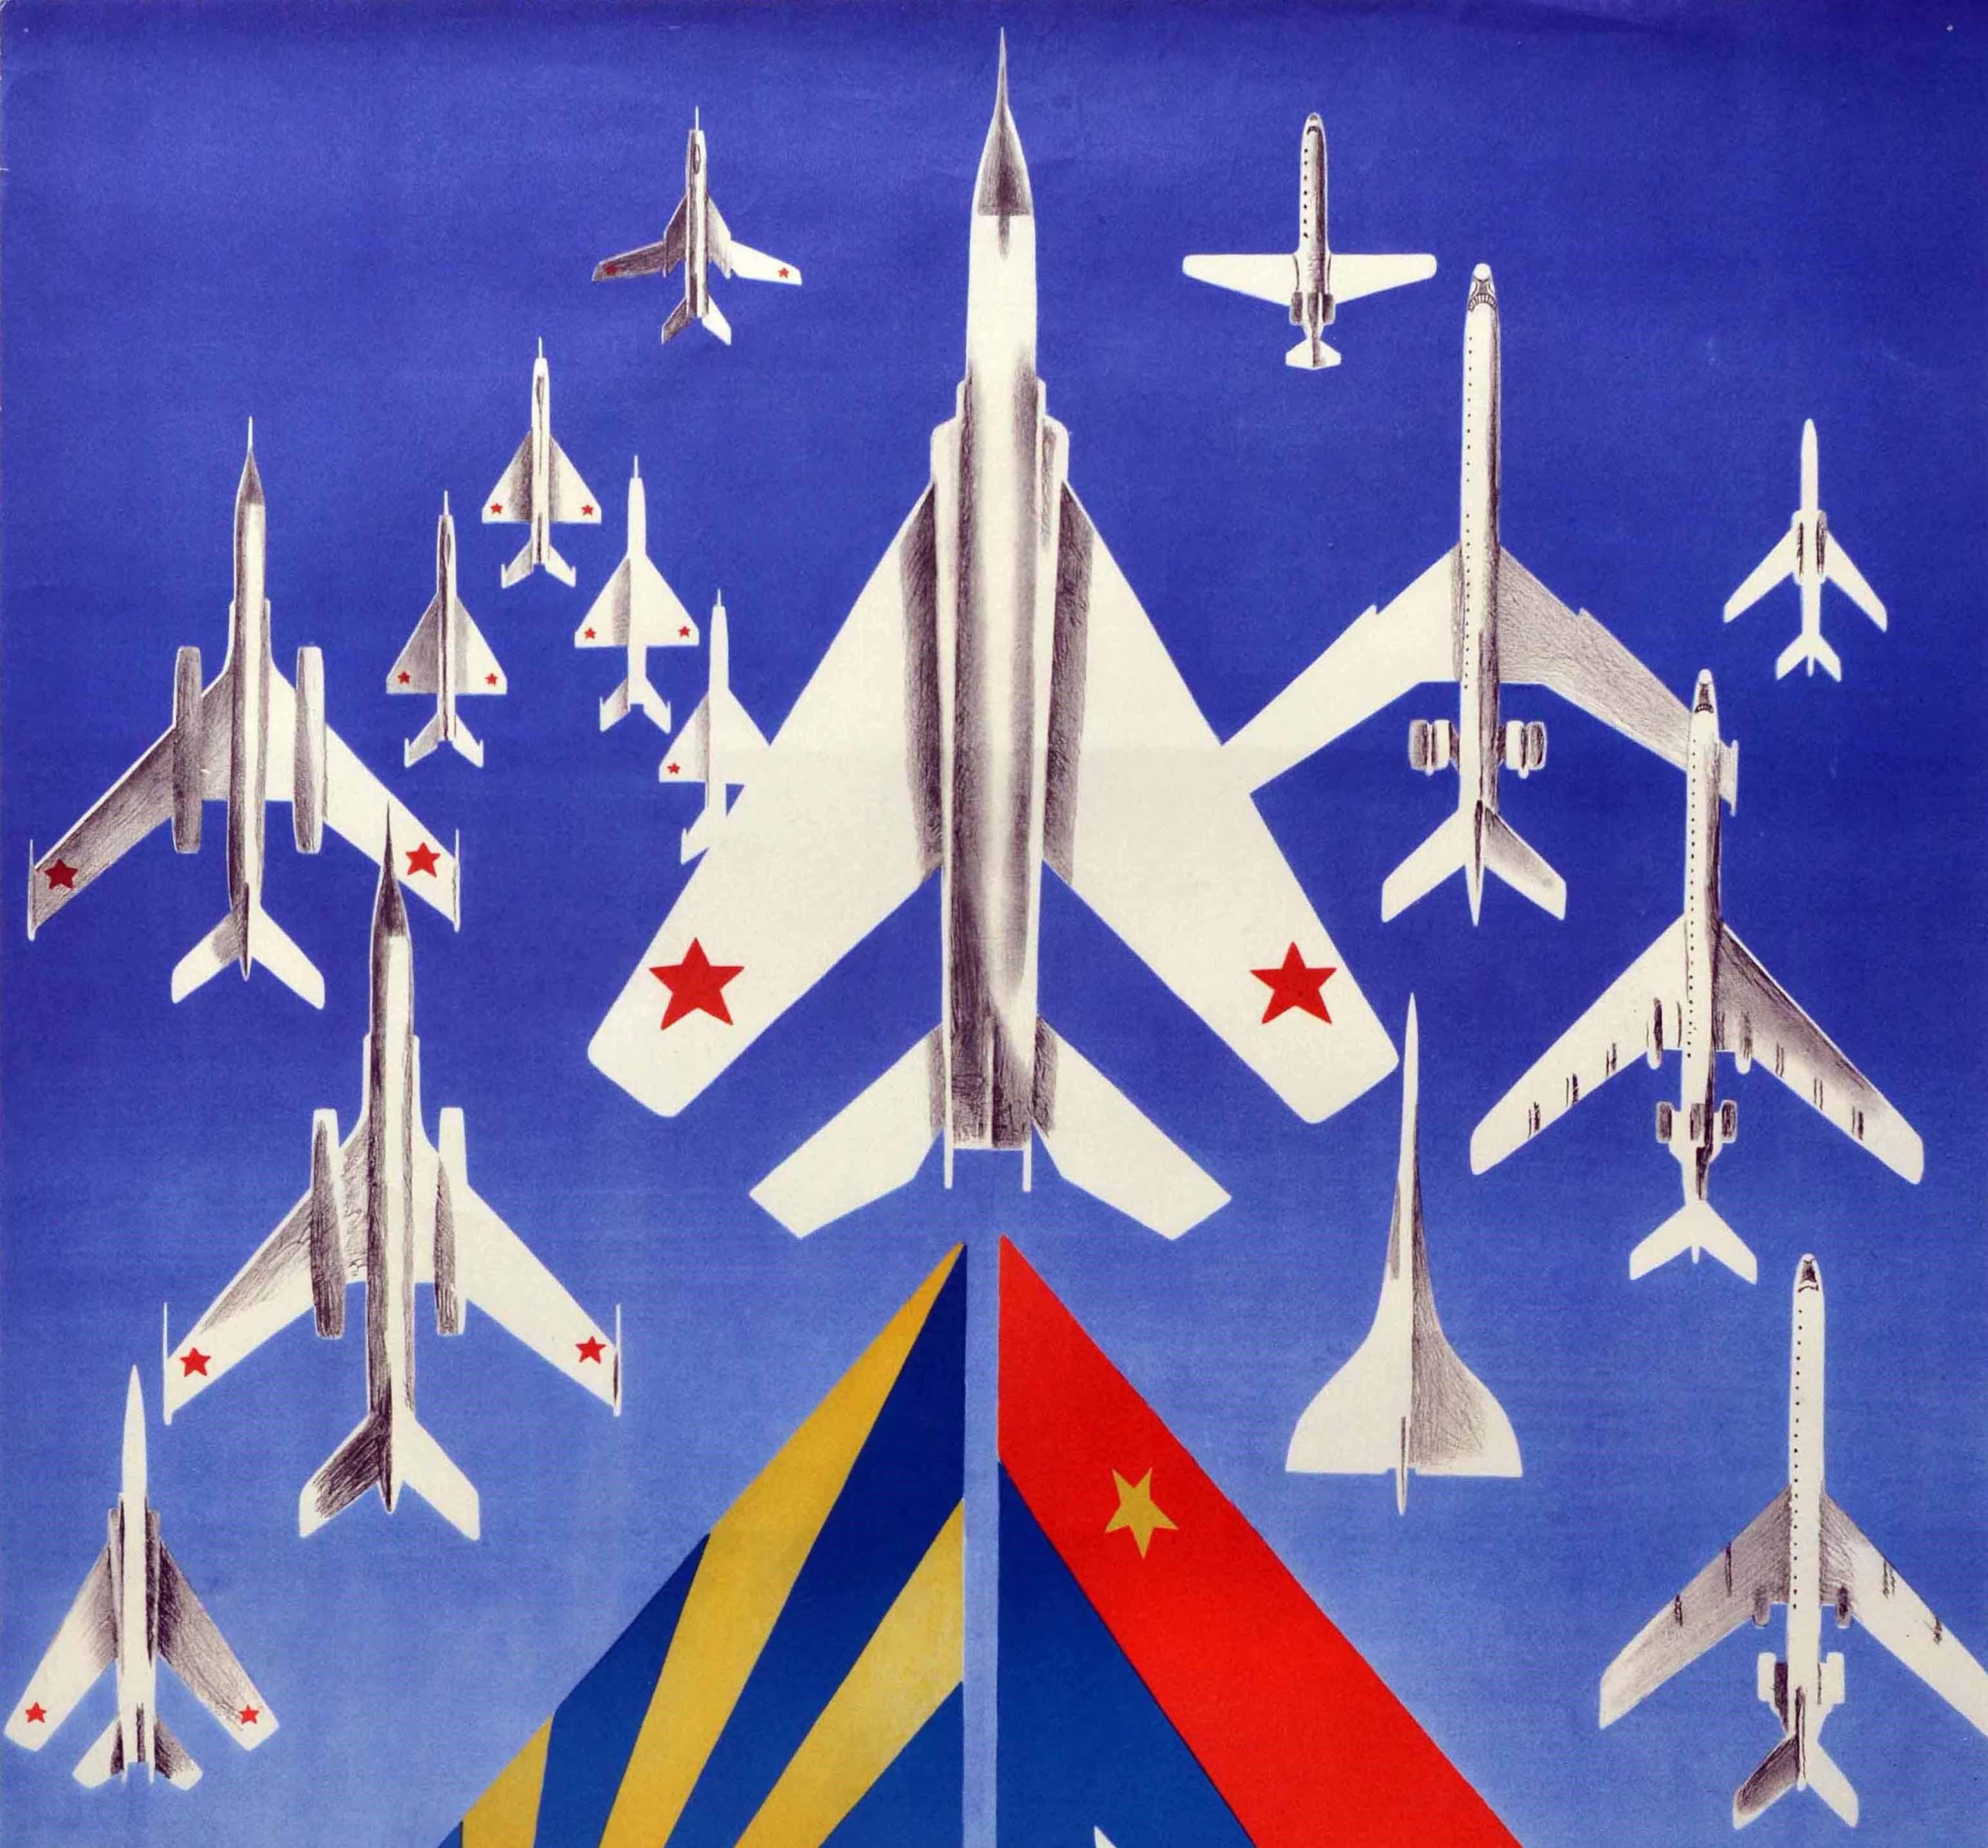 Original vintage Soviet propaganda poster - Крылья Родины слава народа! / The wings of the homeland are the glory of the people! - featuring a great illustration depicting different aircraft from the Soviet Air Force fleet showing the planes with